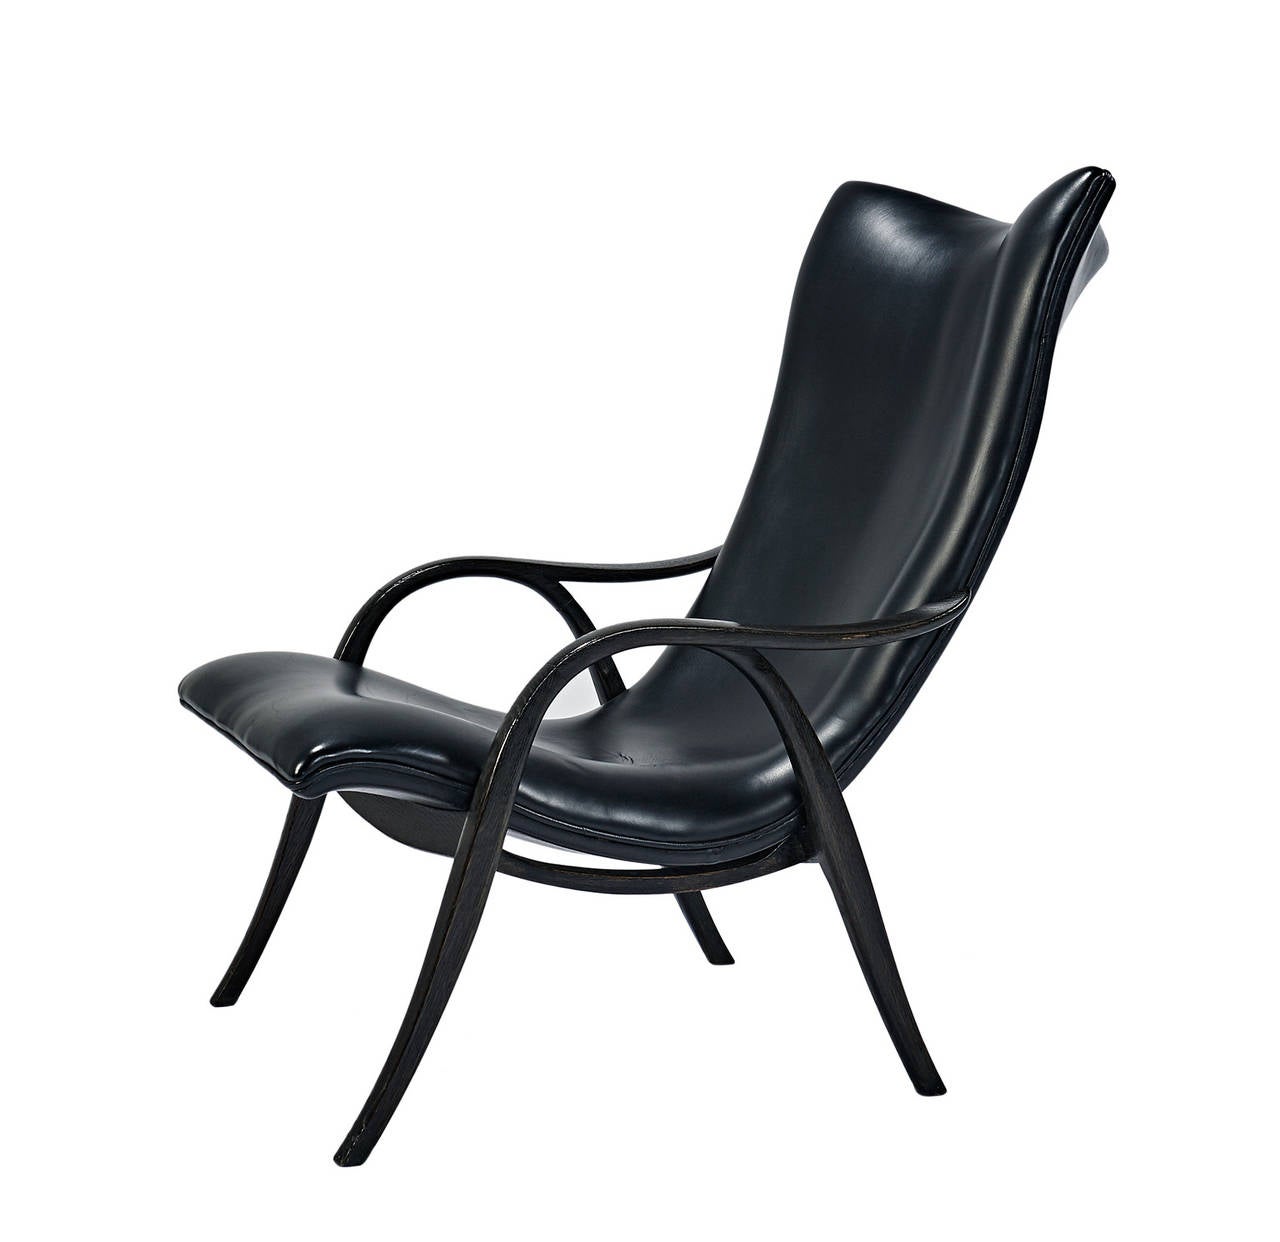 Rare Frits Henningsen lounge chair, 1947. A very rare example. Documented.